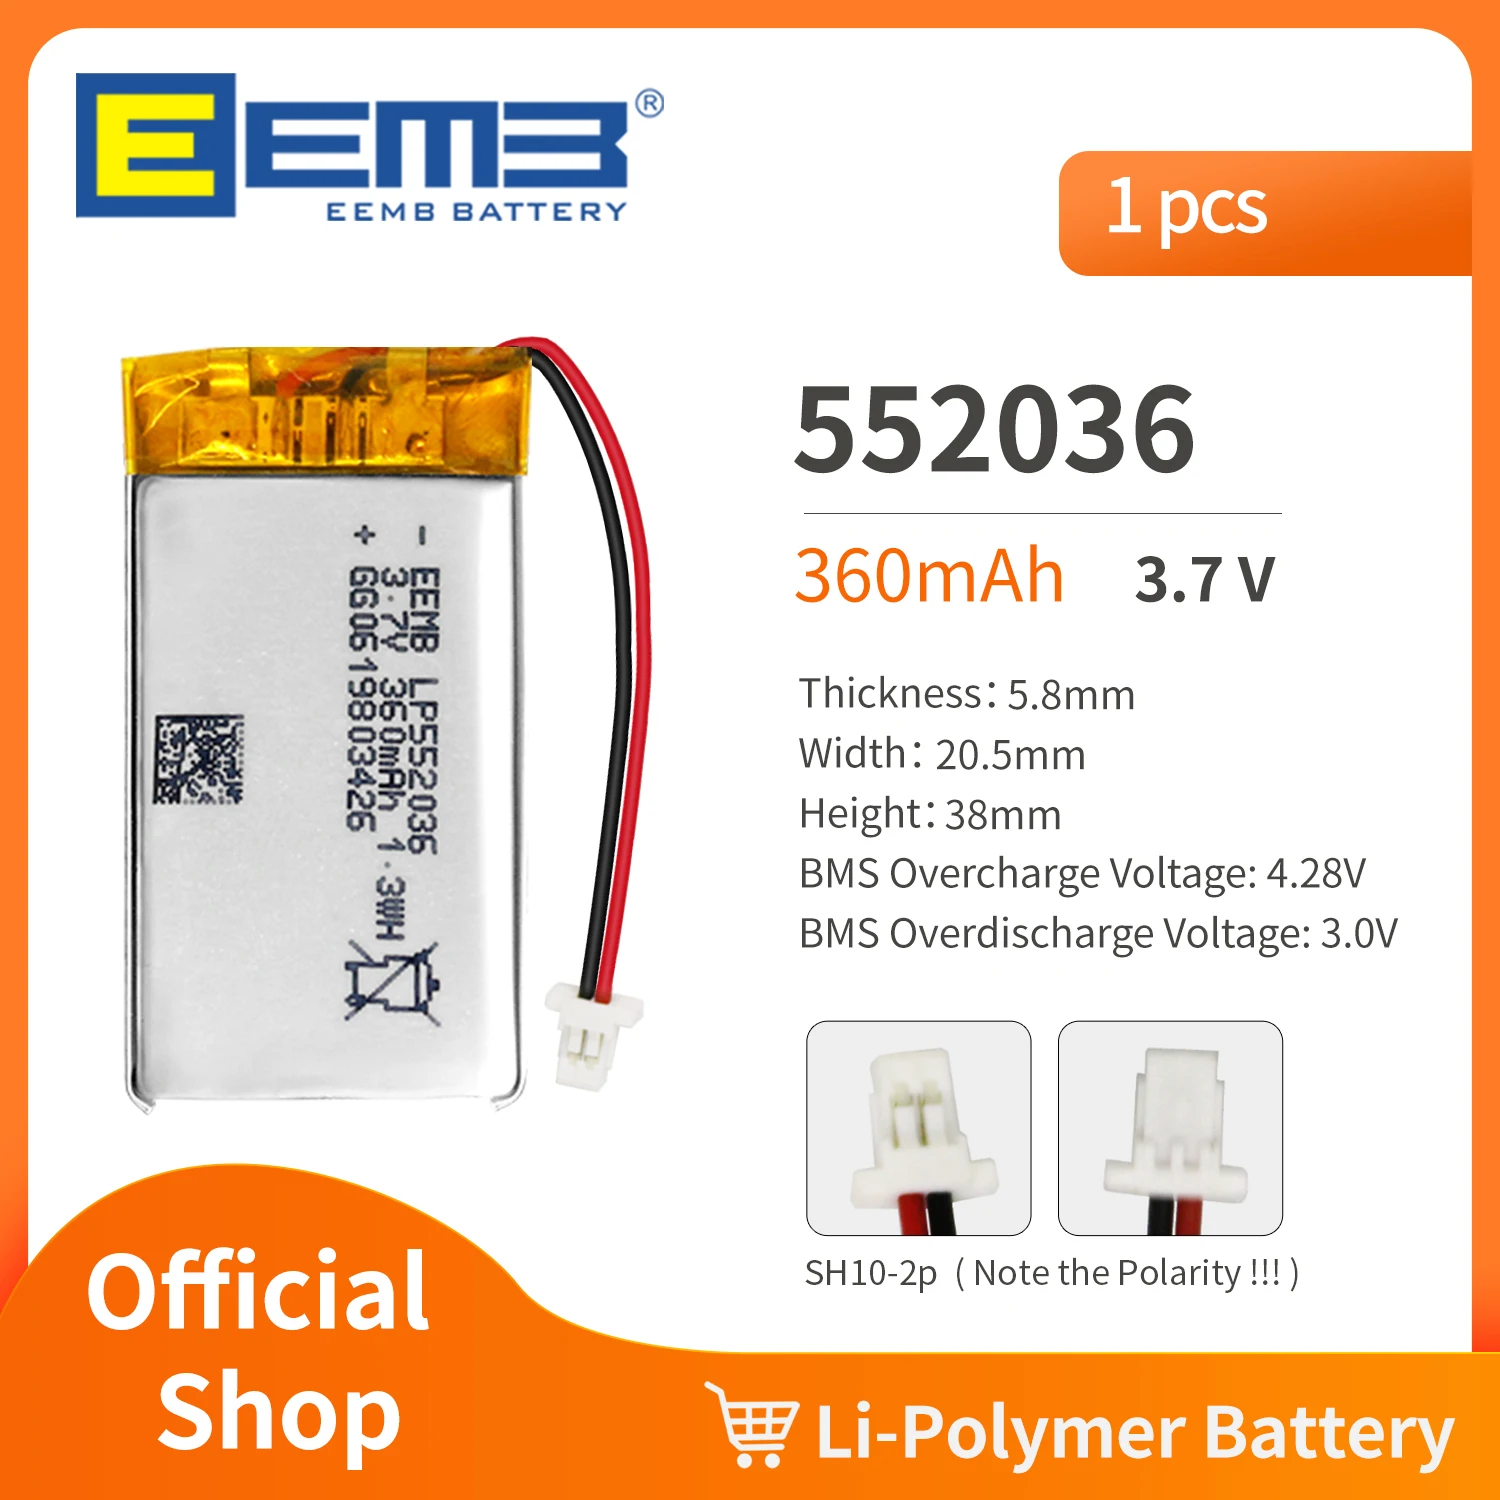 EEMB 552036 3.7V Battery 310mAh Rechargeable Lithium Polymer Battery Pack For Dashcam,Flashlight,Bluetooth Speaker, GPS,Camera